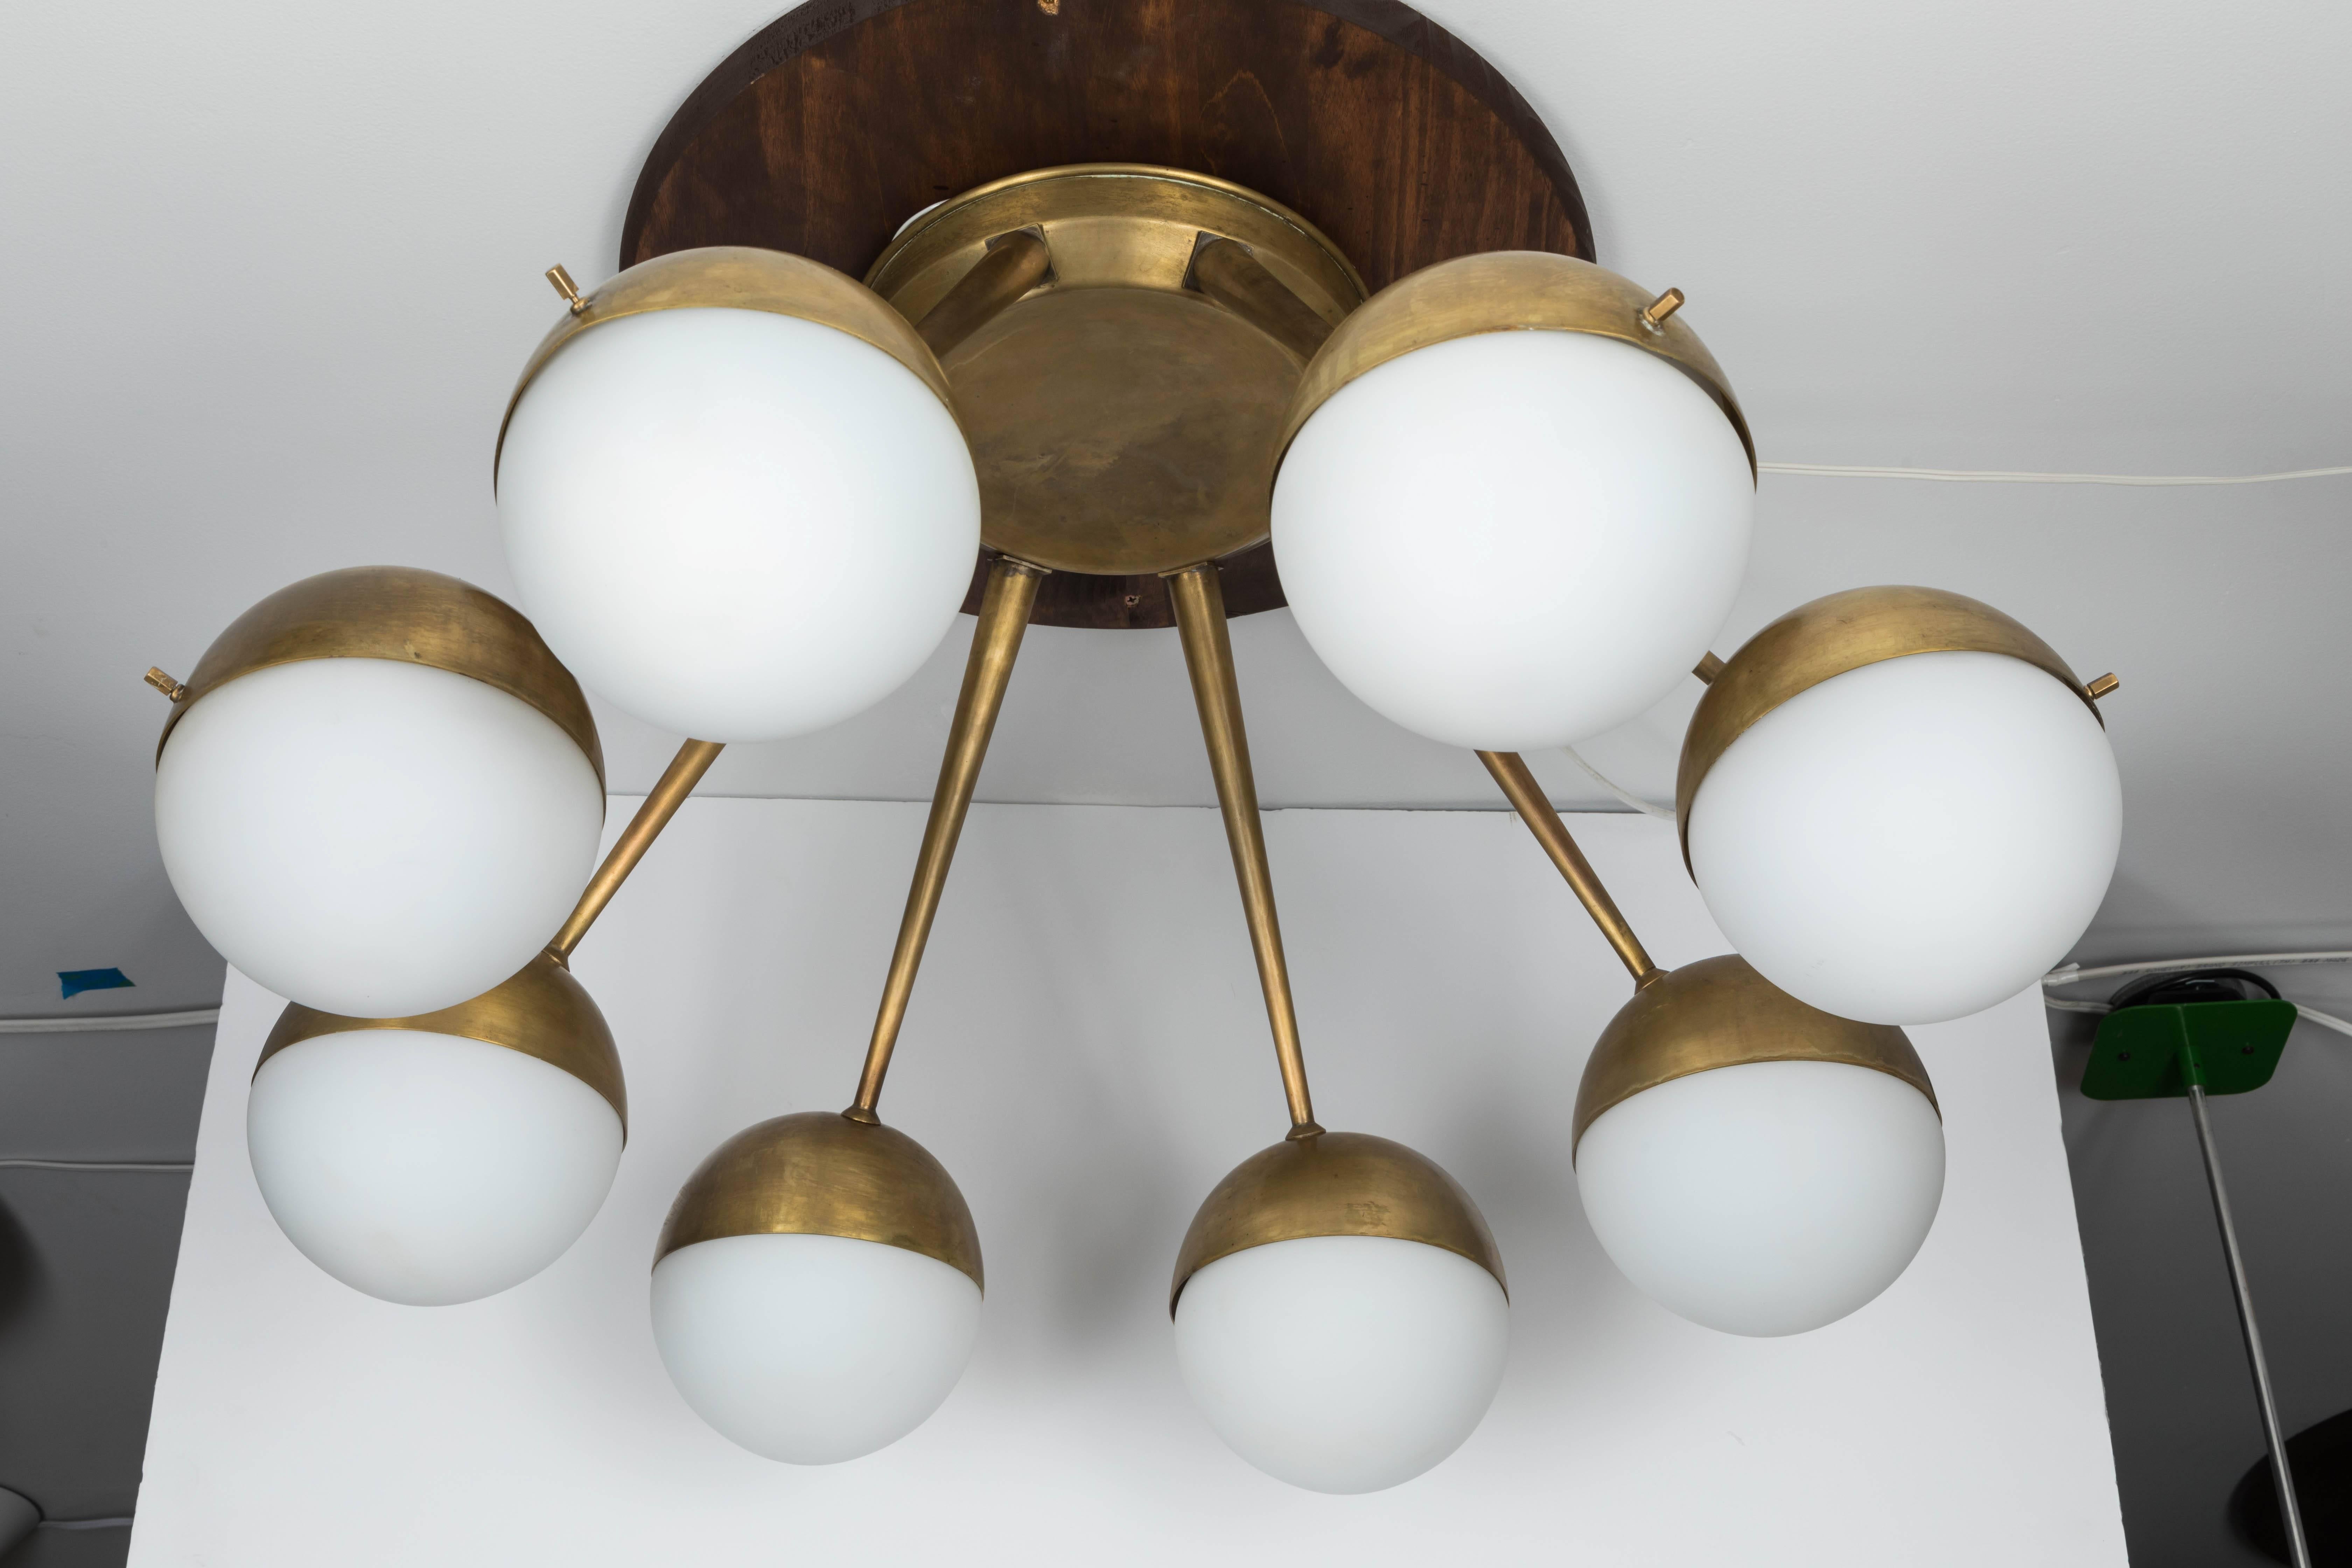 Large 1960s Italian eight-arm brass and glass chandelier Attributed to Stilnovo. Executed in patinated brass and thick 6 inch diameter matte opaline glass globes. A sculptural and refined design characteristic of 1950s Italian design at its highest